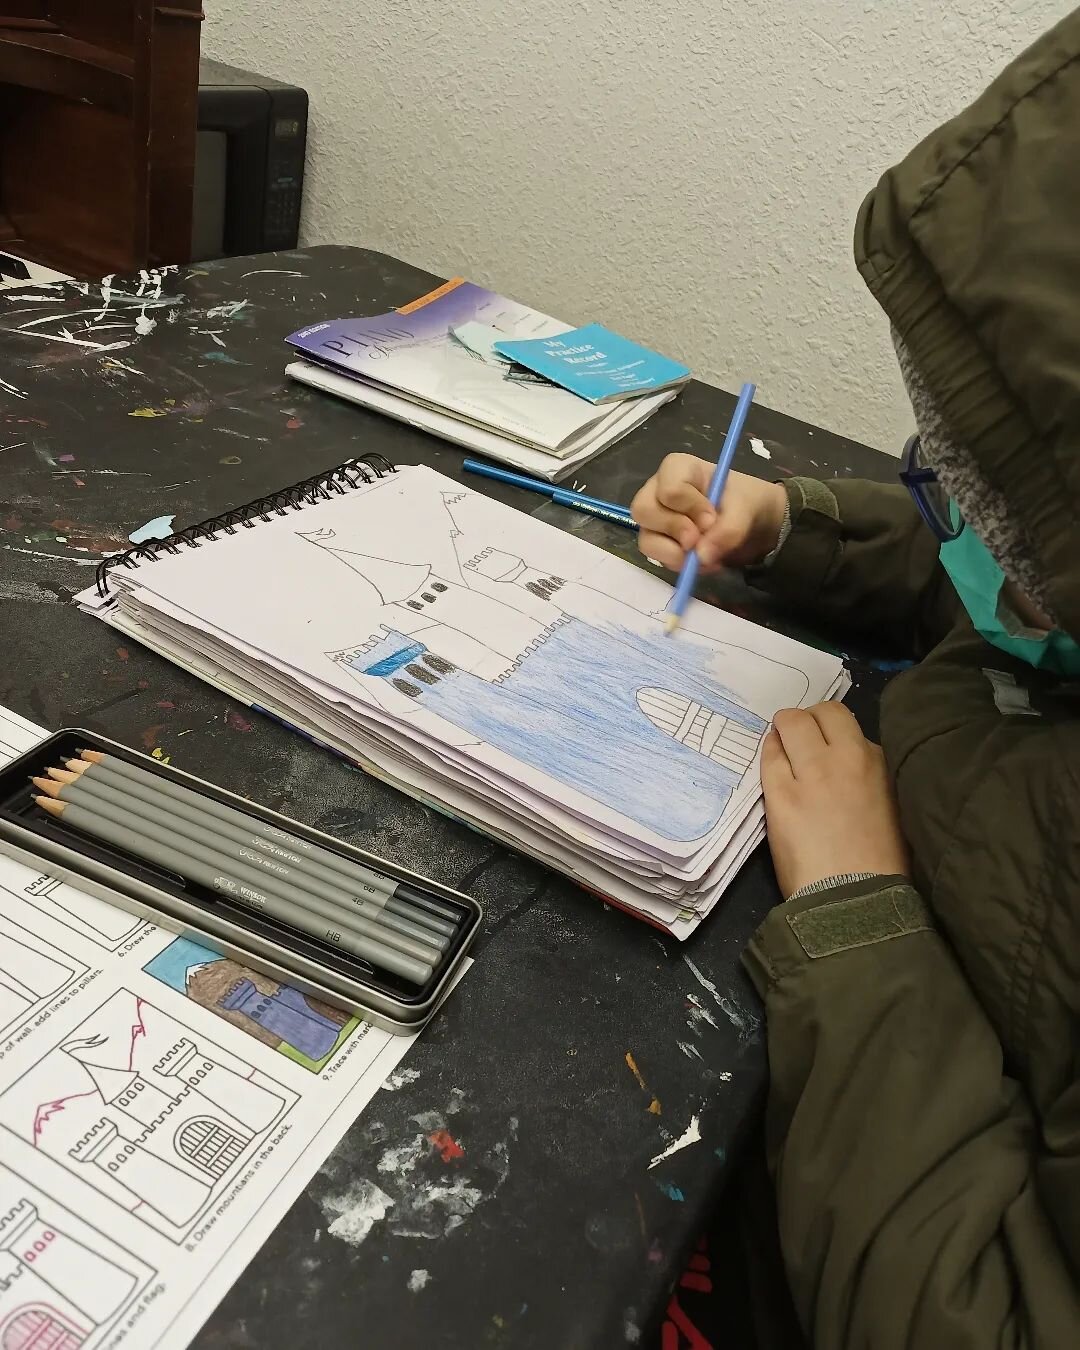 Getting to watch our kiddos get creative and try new things is so rewarding!
.
#newcottagearts #newcottageartsdenver #art #artlessons #artclasses #drawinglessons #drawingclasses #drawing